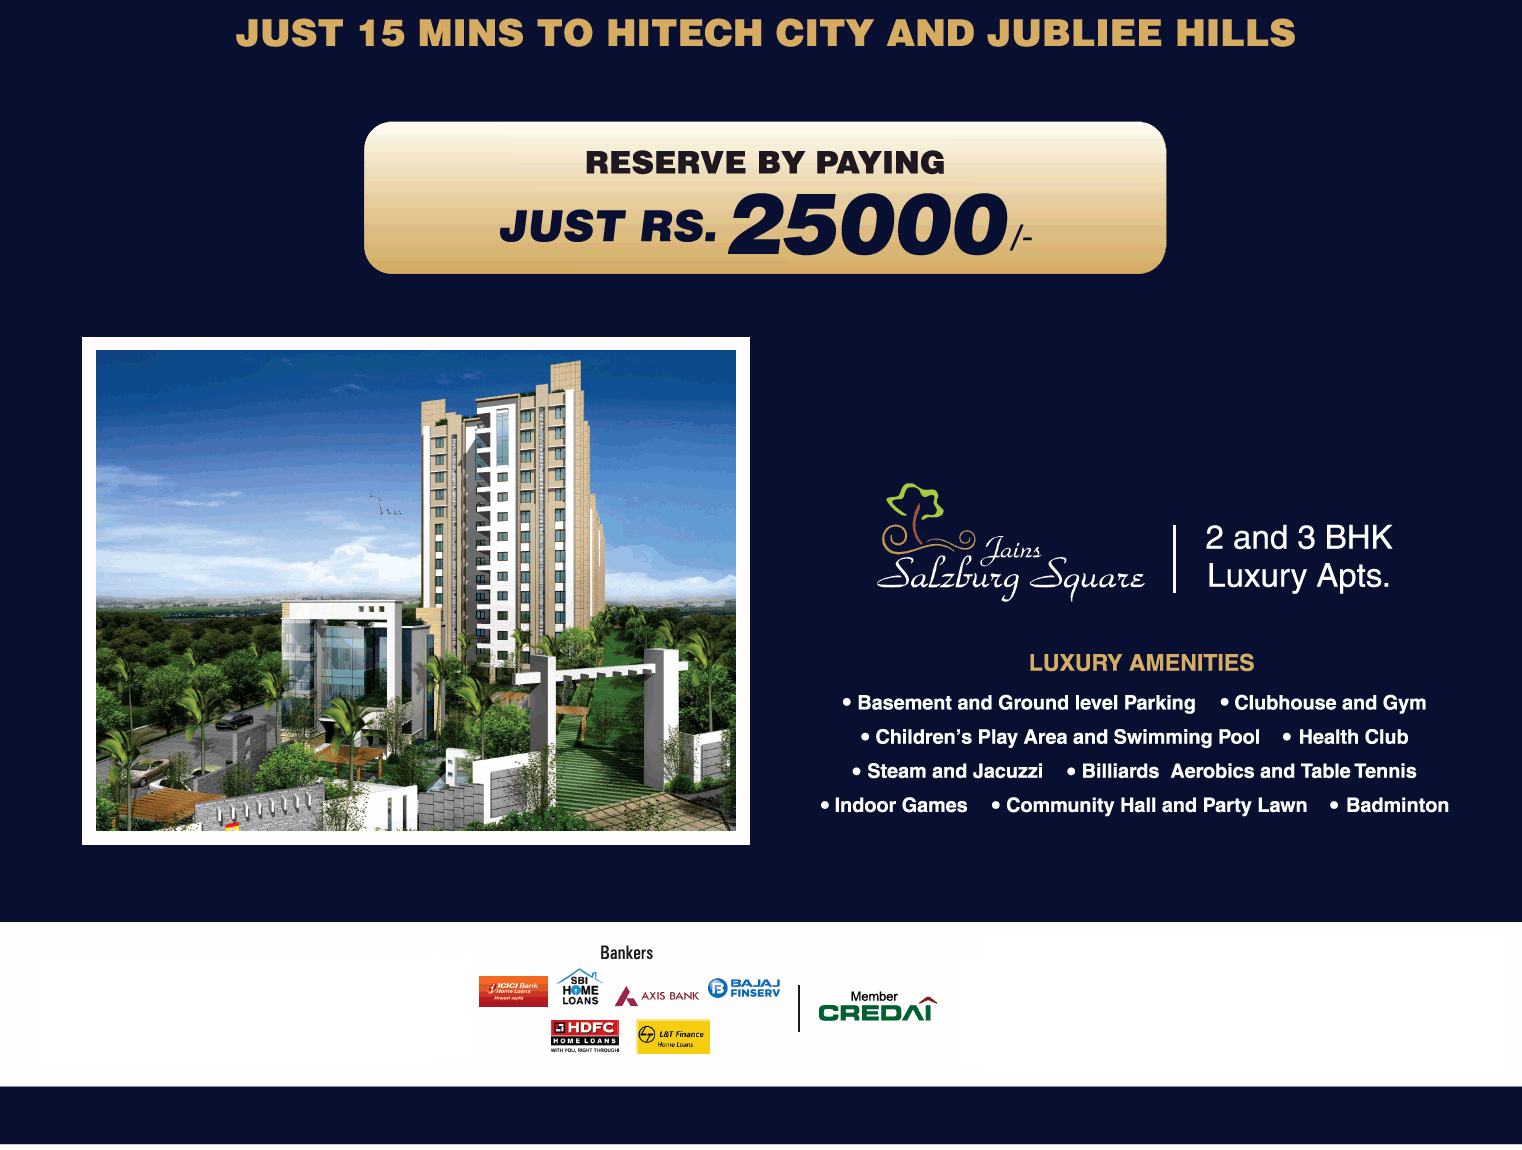 2 and 3 BHK luxury apartments at Jains Salzburg Square in Hyderabad